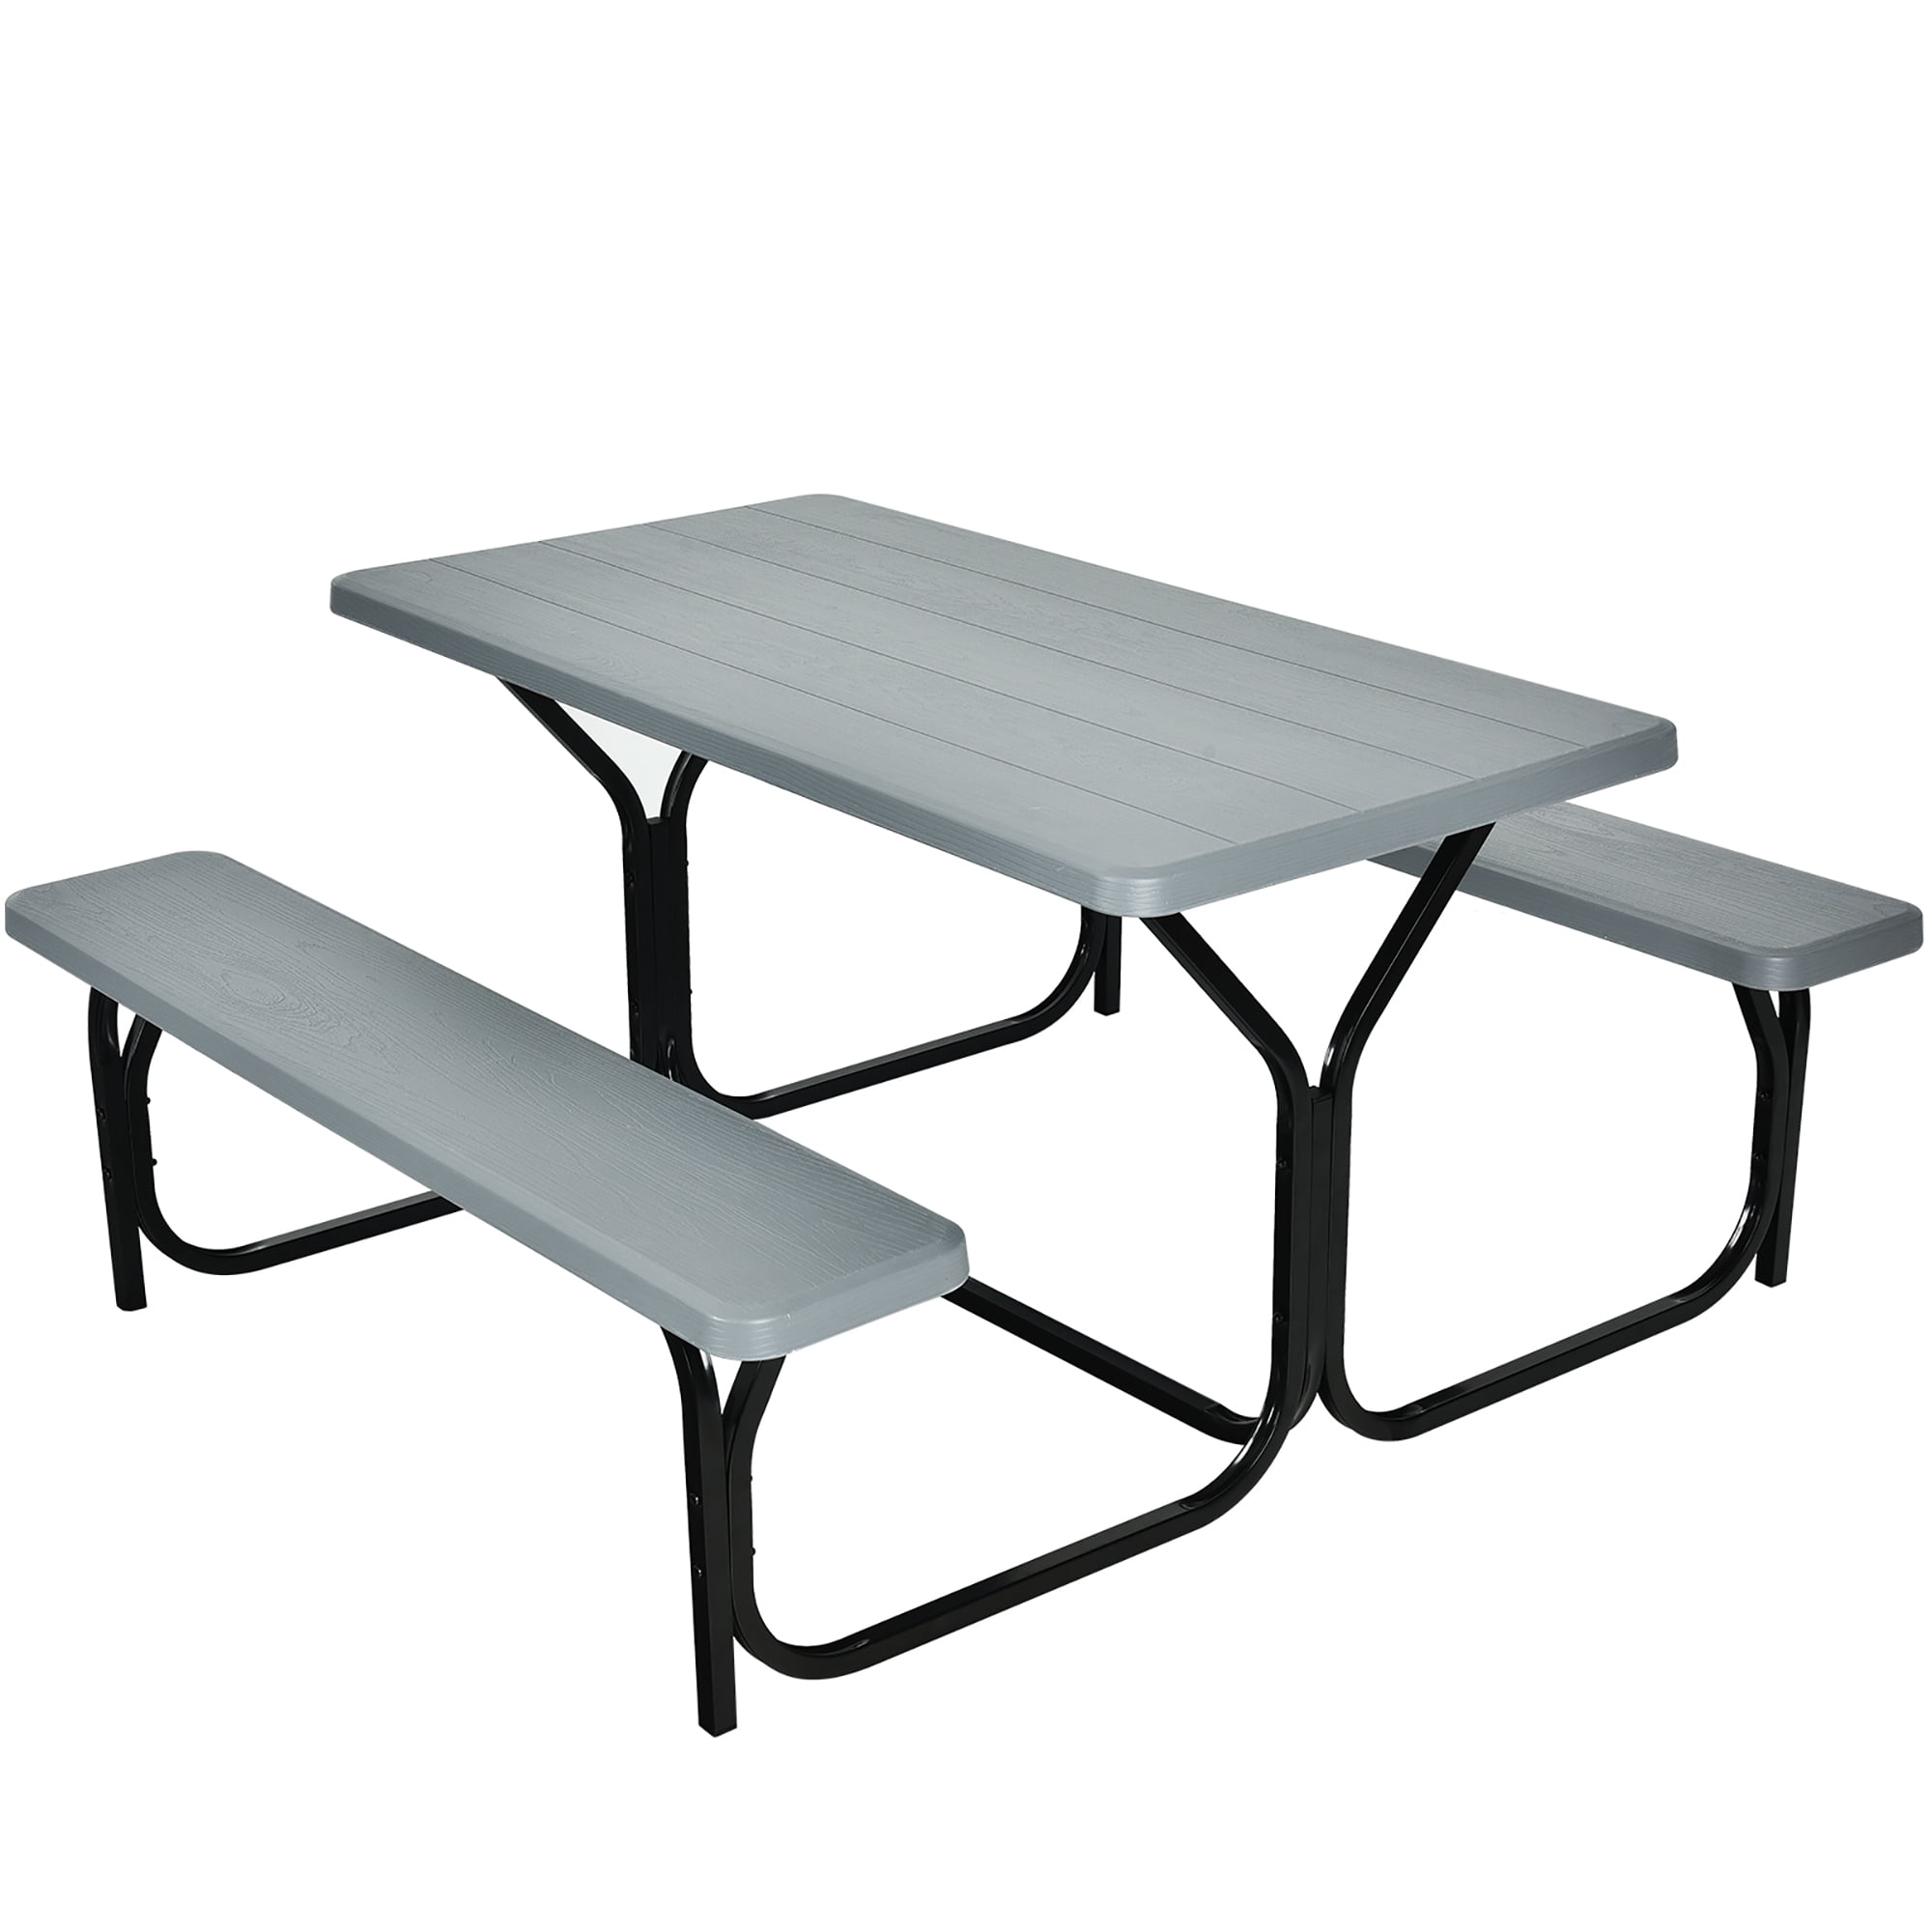 Picnic Table Bench Wood Frames Durable Heavy Duty Weather Resistant Portable